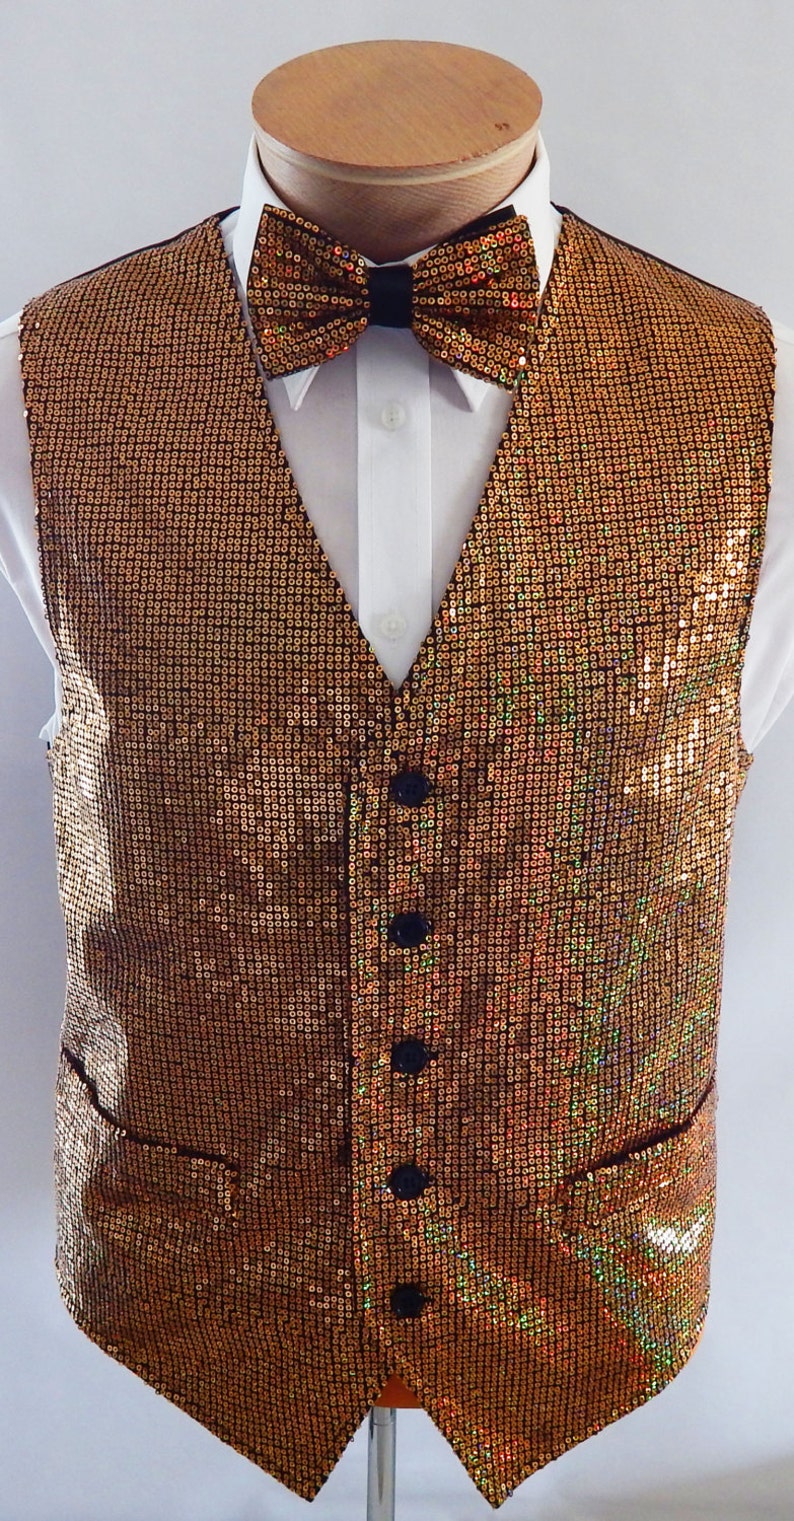 Mens Gold Sequin Vest and Bow Tie Set - Etsy